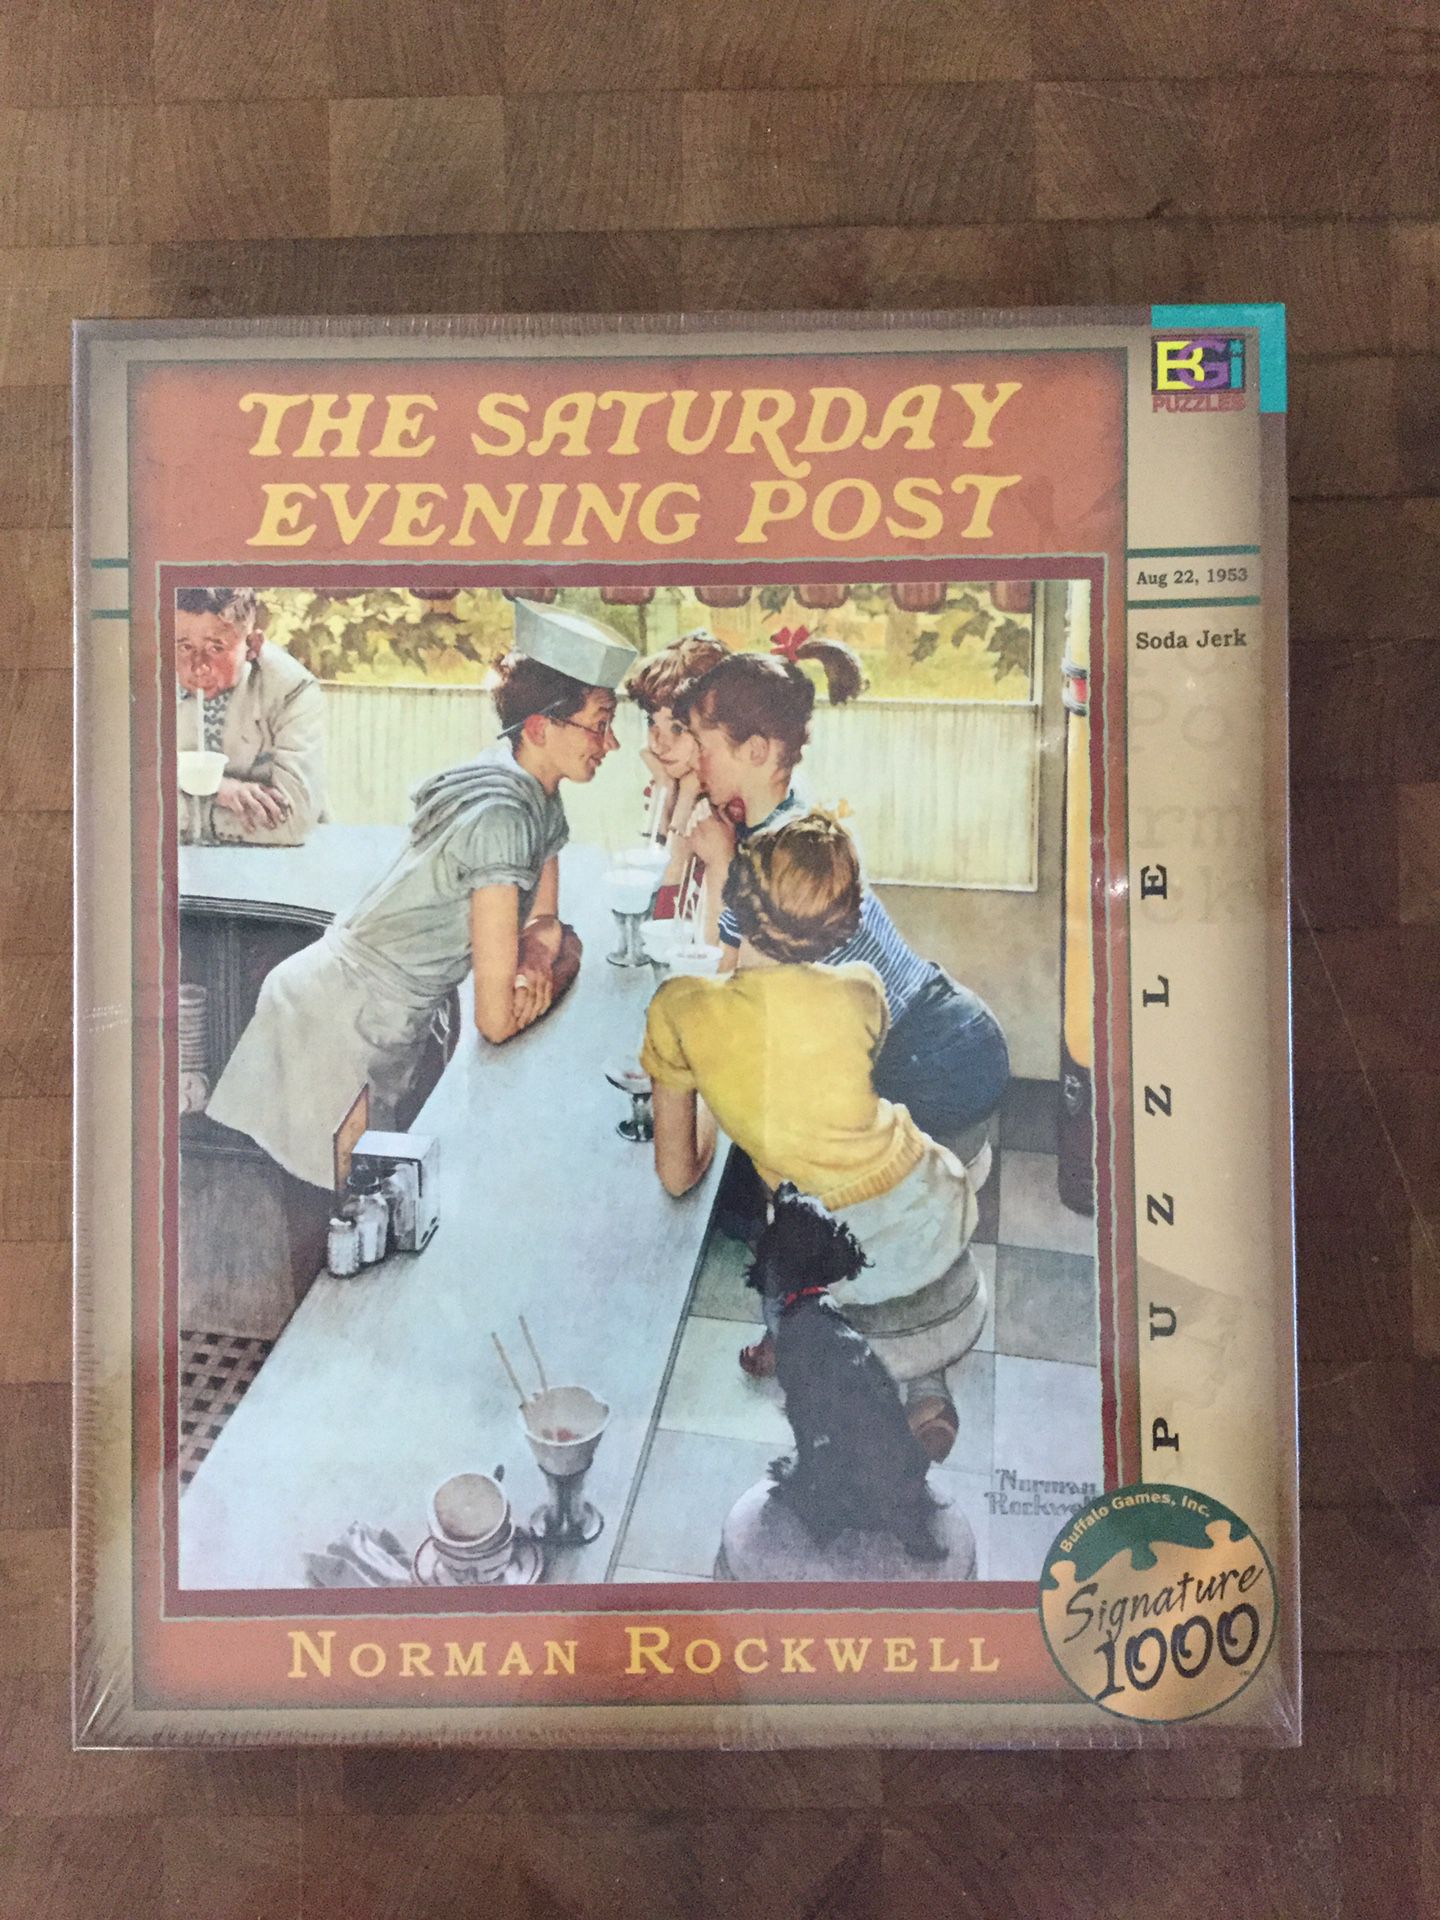 The Saturday Evening Post - Norman Rockwell “ Soda Jerk” Puzzle by Buffalo Games, Inc.